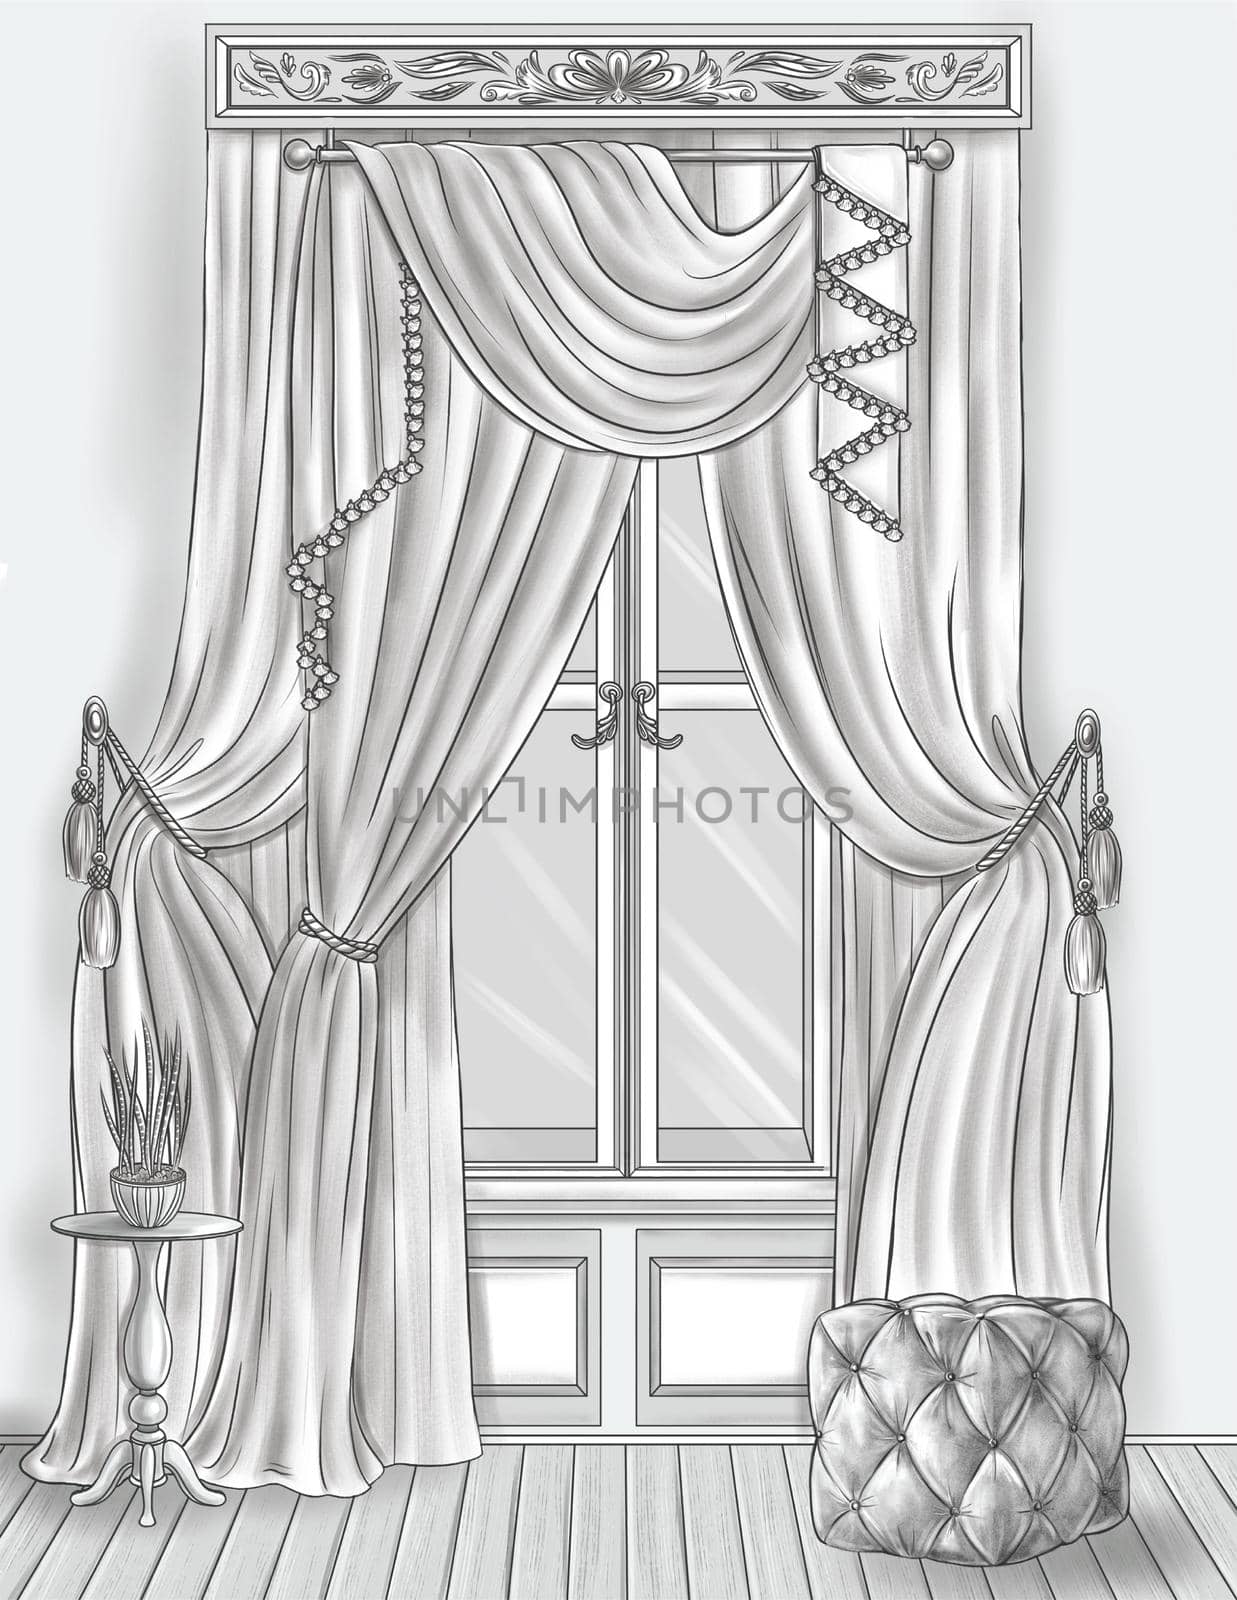 Tall Glass Window Pane With Beautiful Curtain Beside A Plant Vase Placed On A Table Colorless Line Drawing. House Windows With Long Drapes Coloring Book Page. by nialowwa